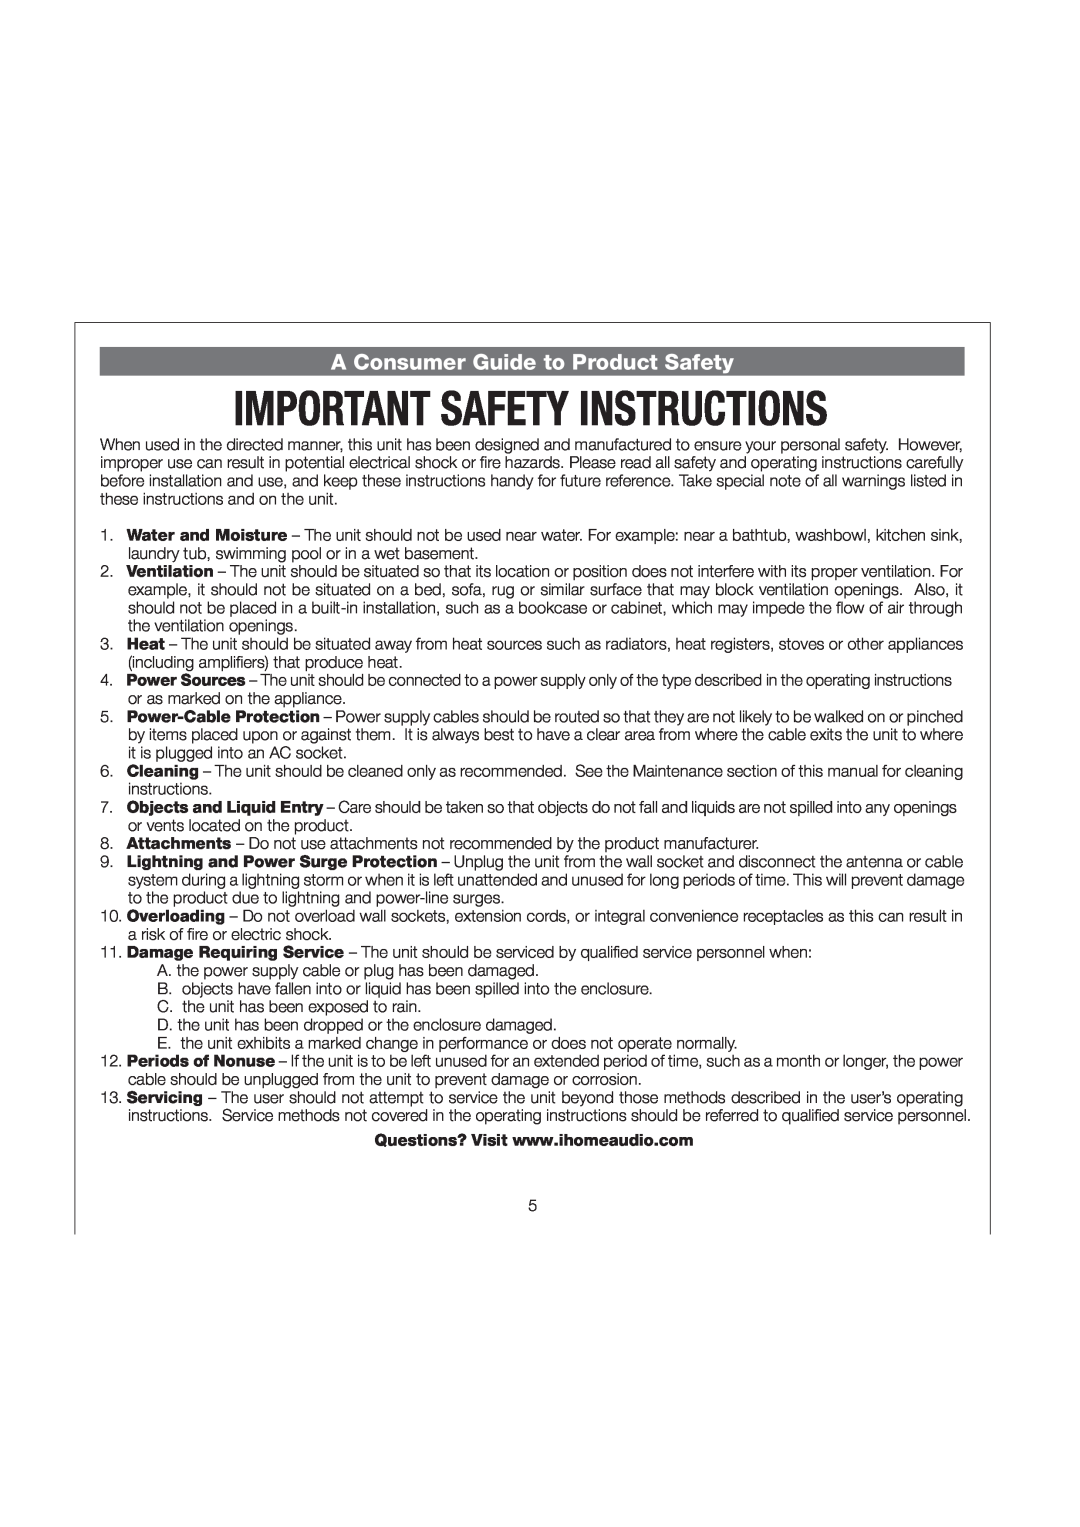 iHome IP57 manual A Consumer Guide to Product Safety 